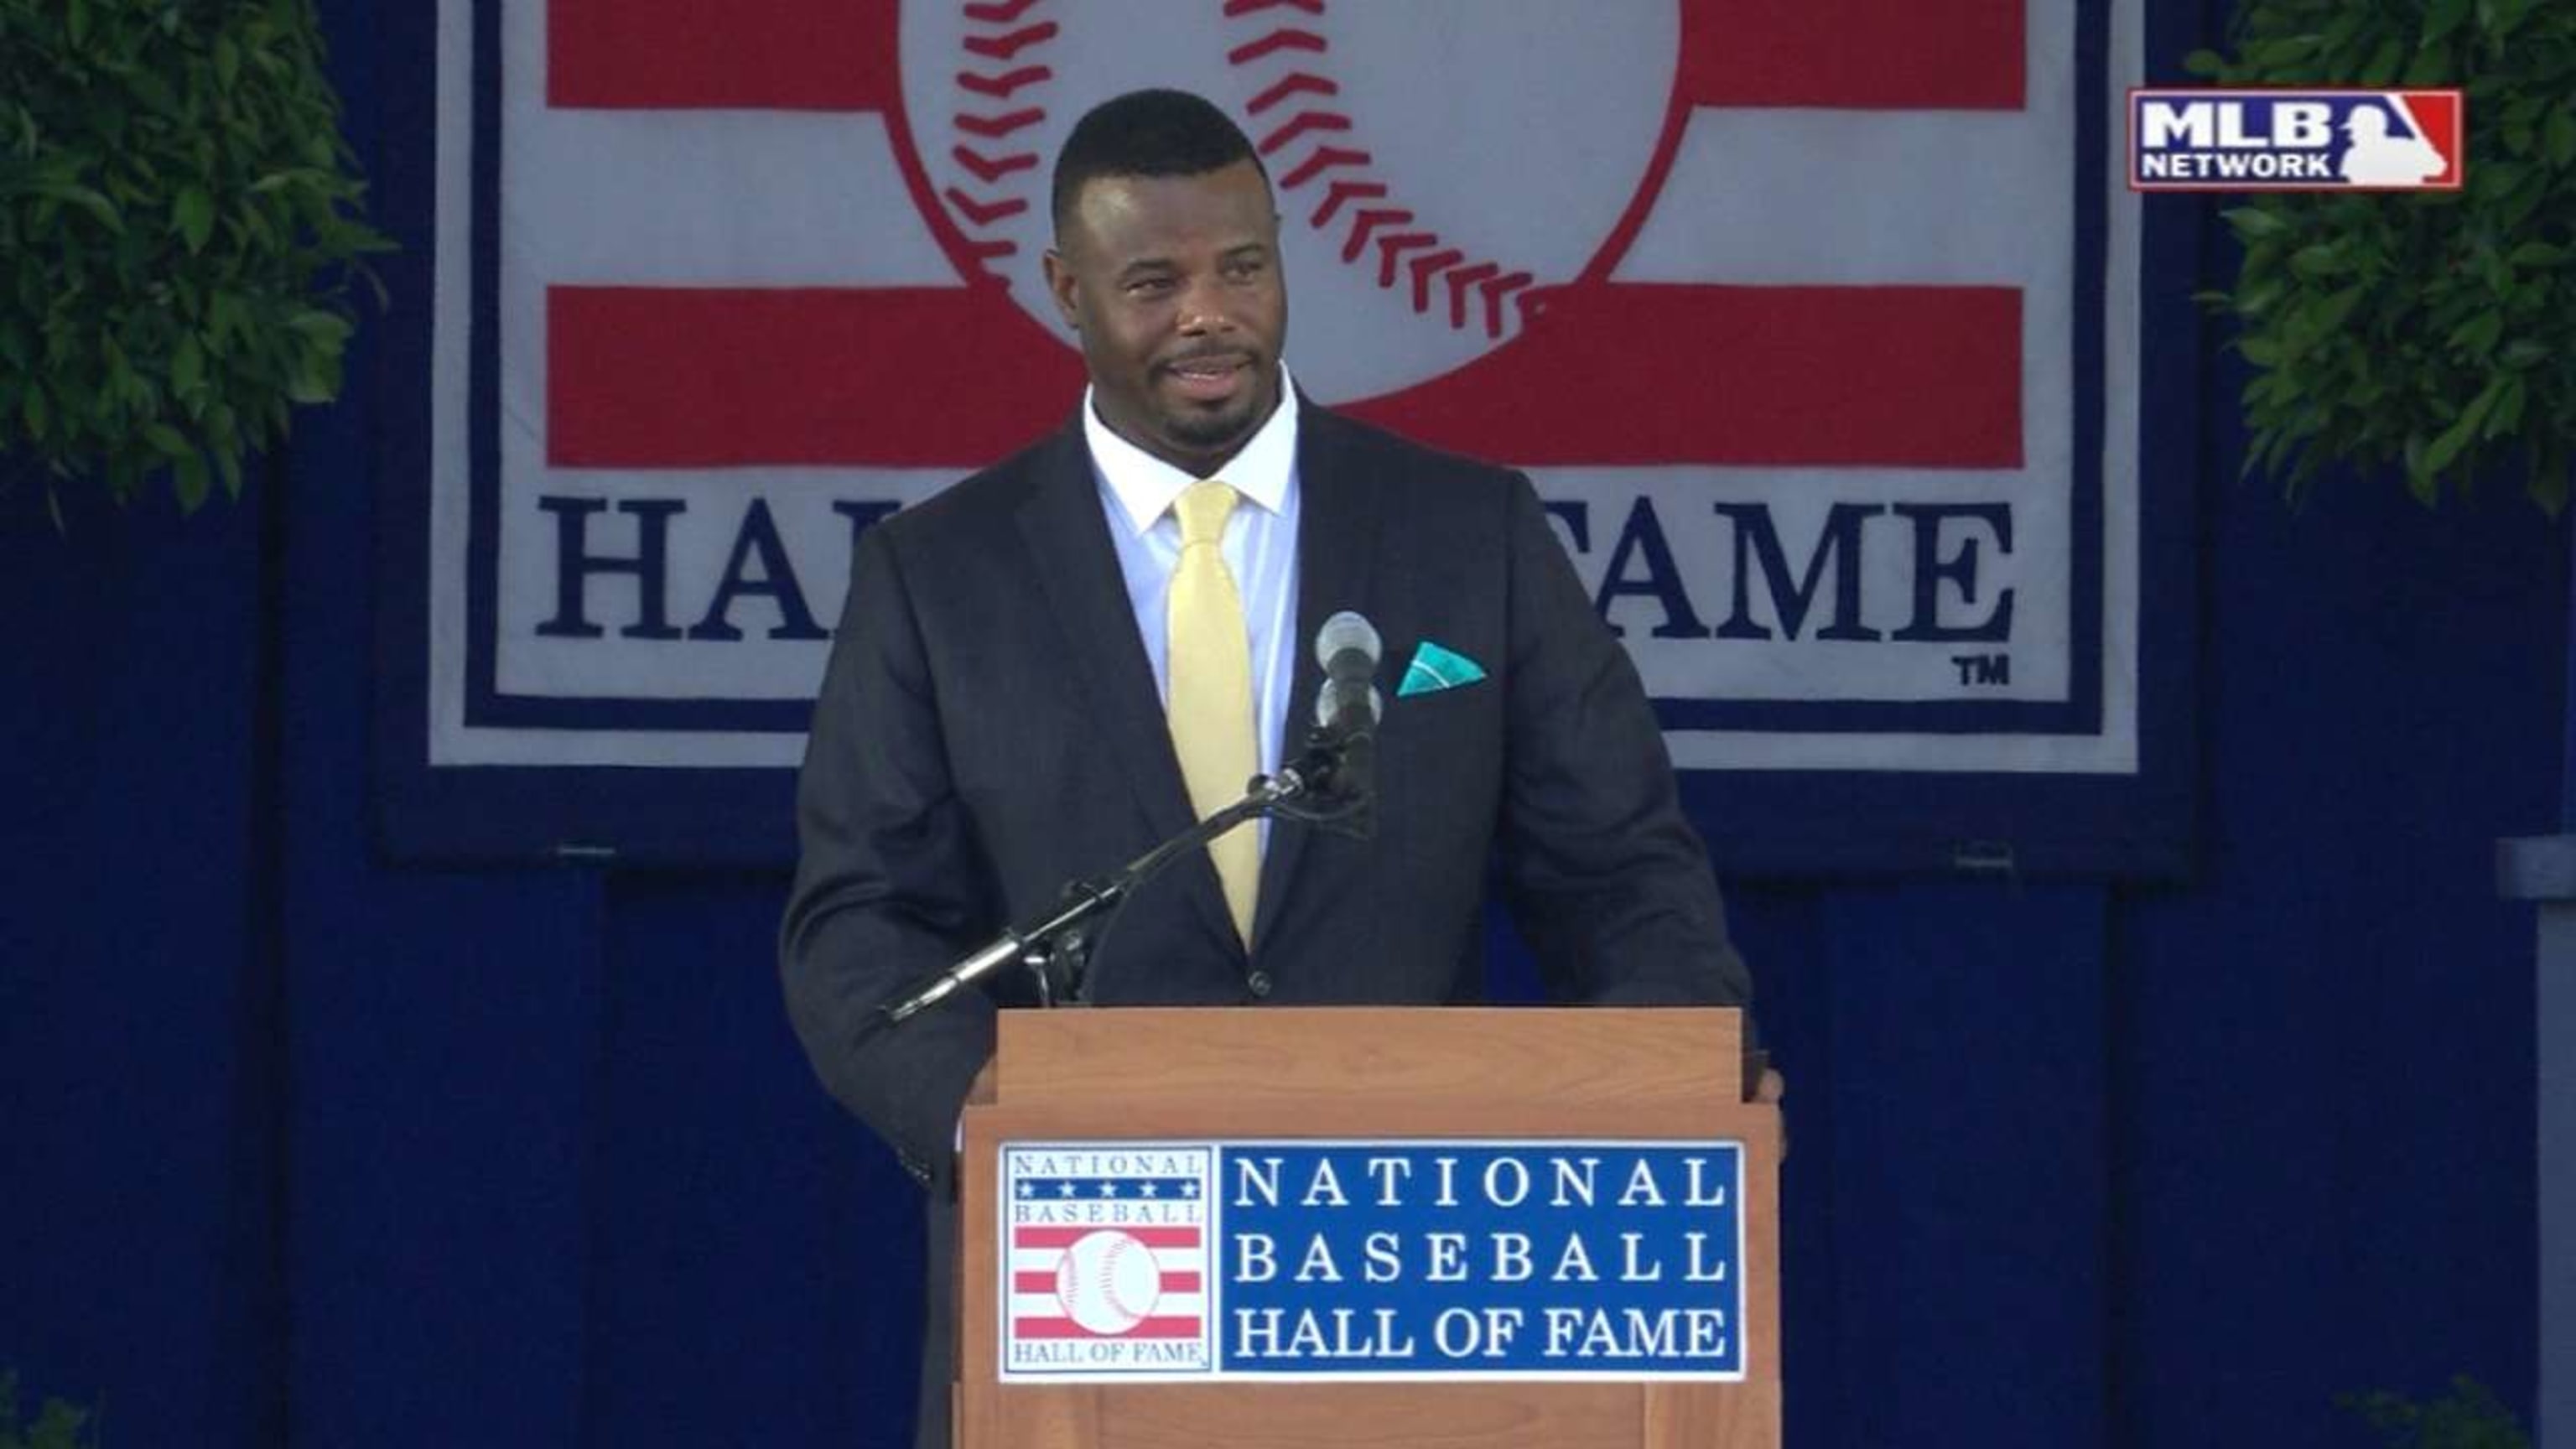 Ken Griffey Jr. inducted into Hall of Fame